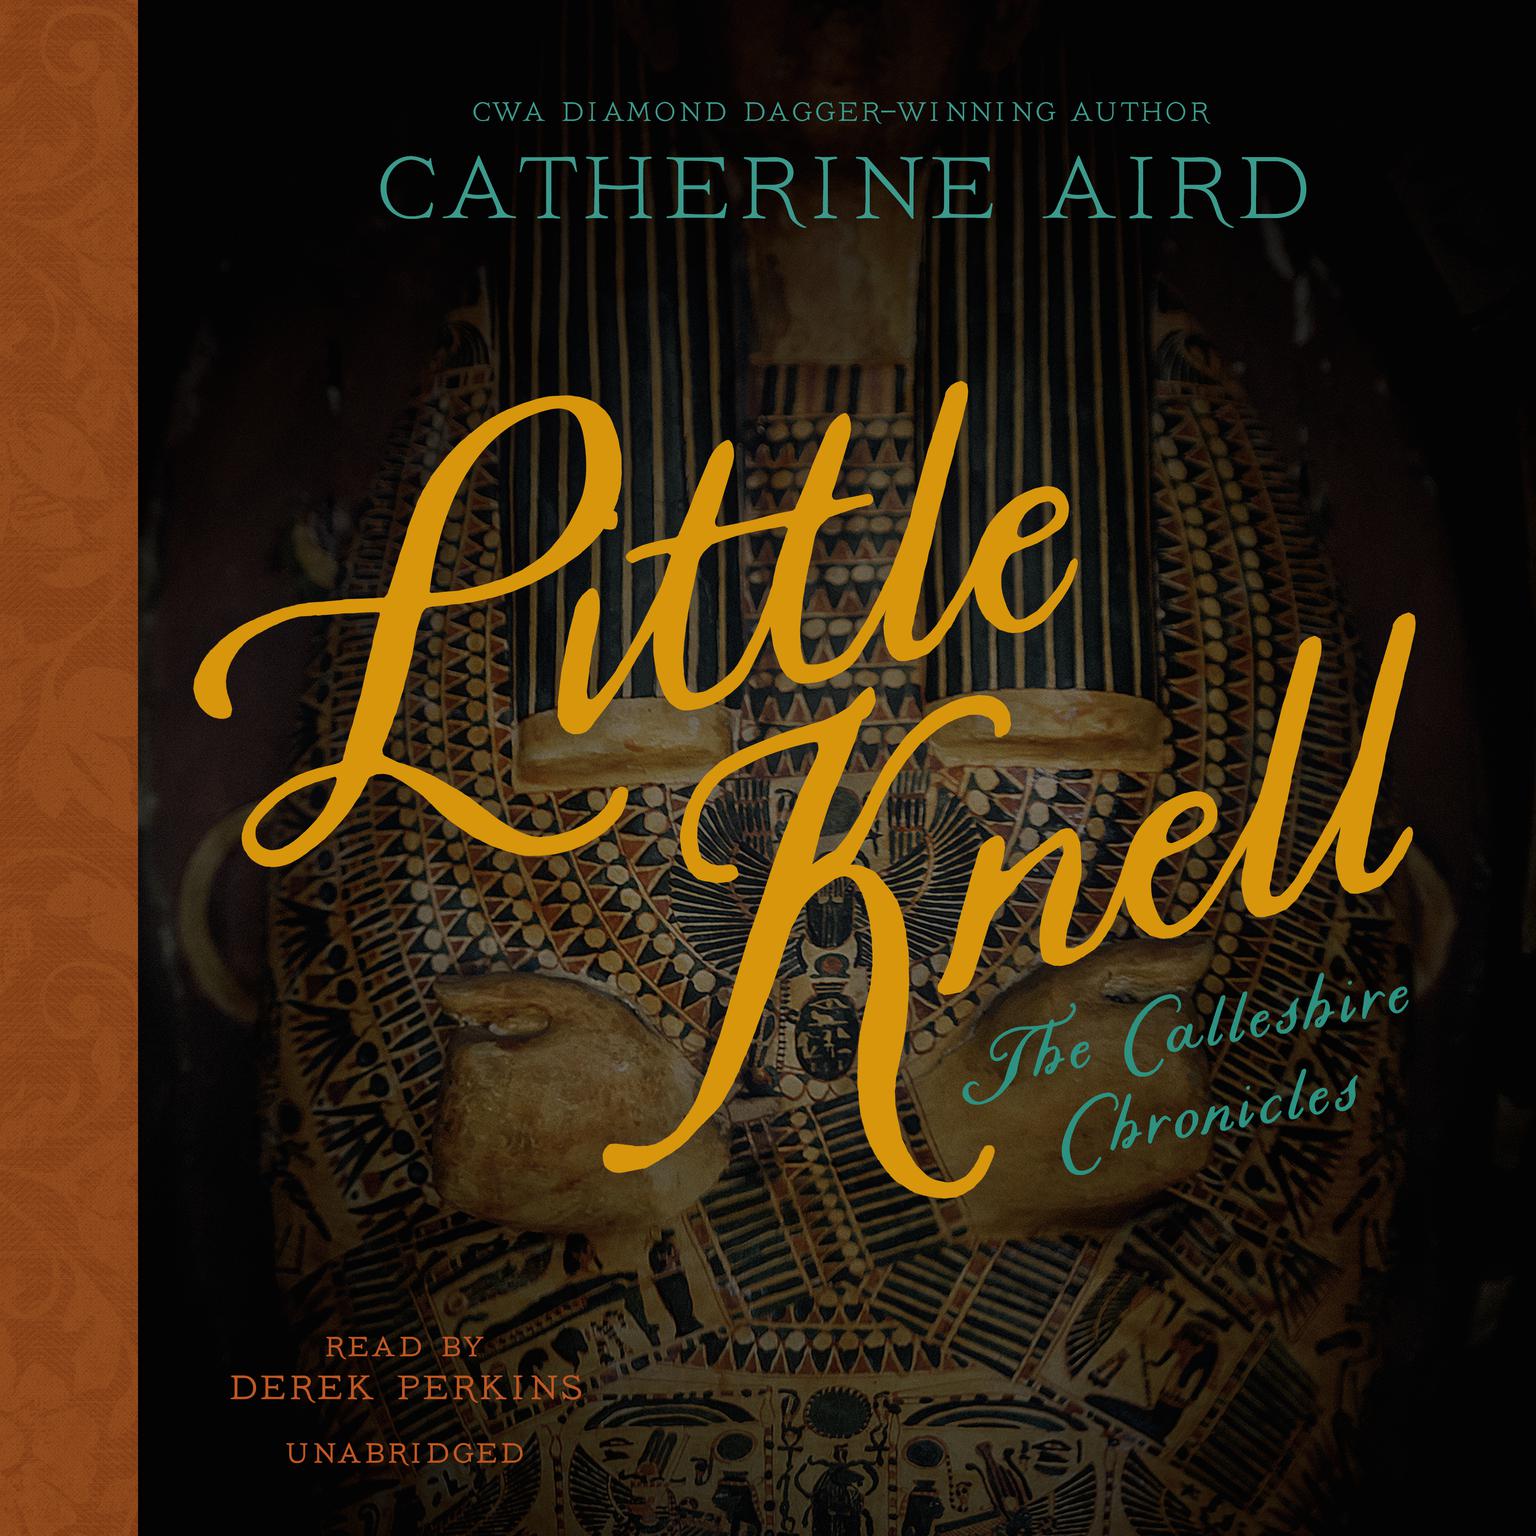 Little Knell Audiobook, by Catherine Aird